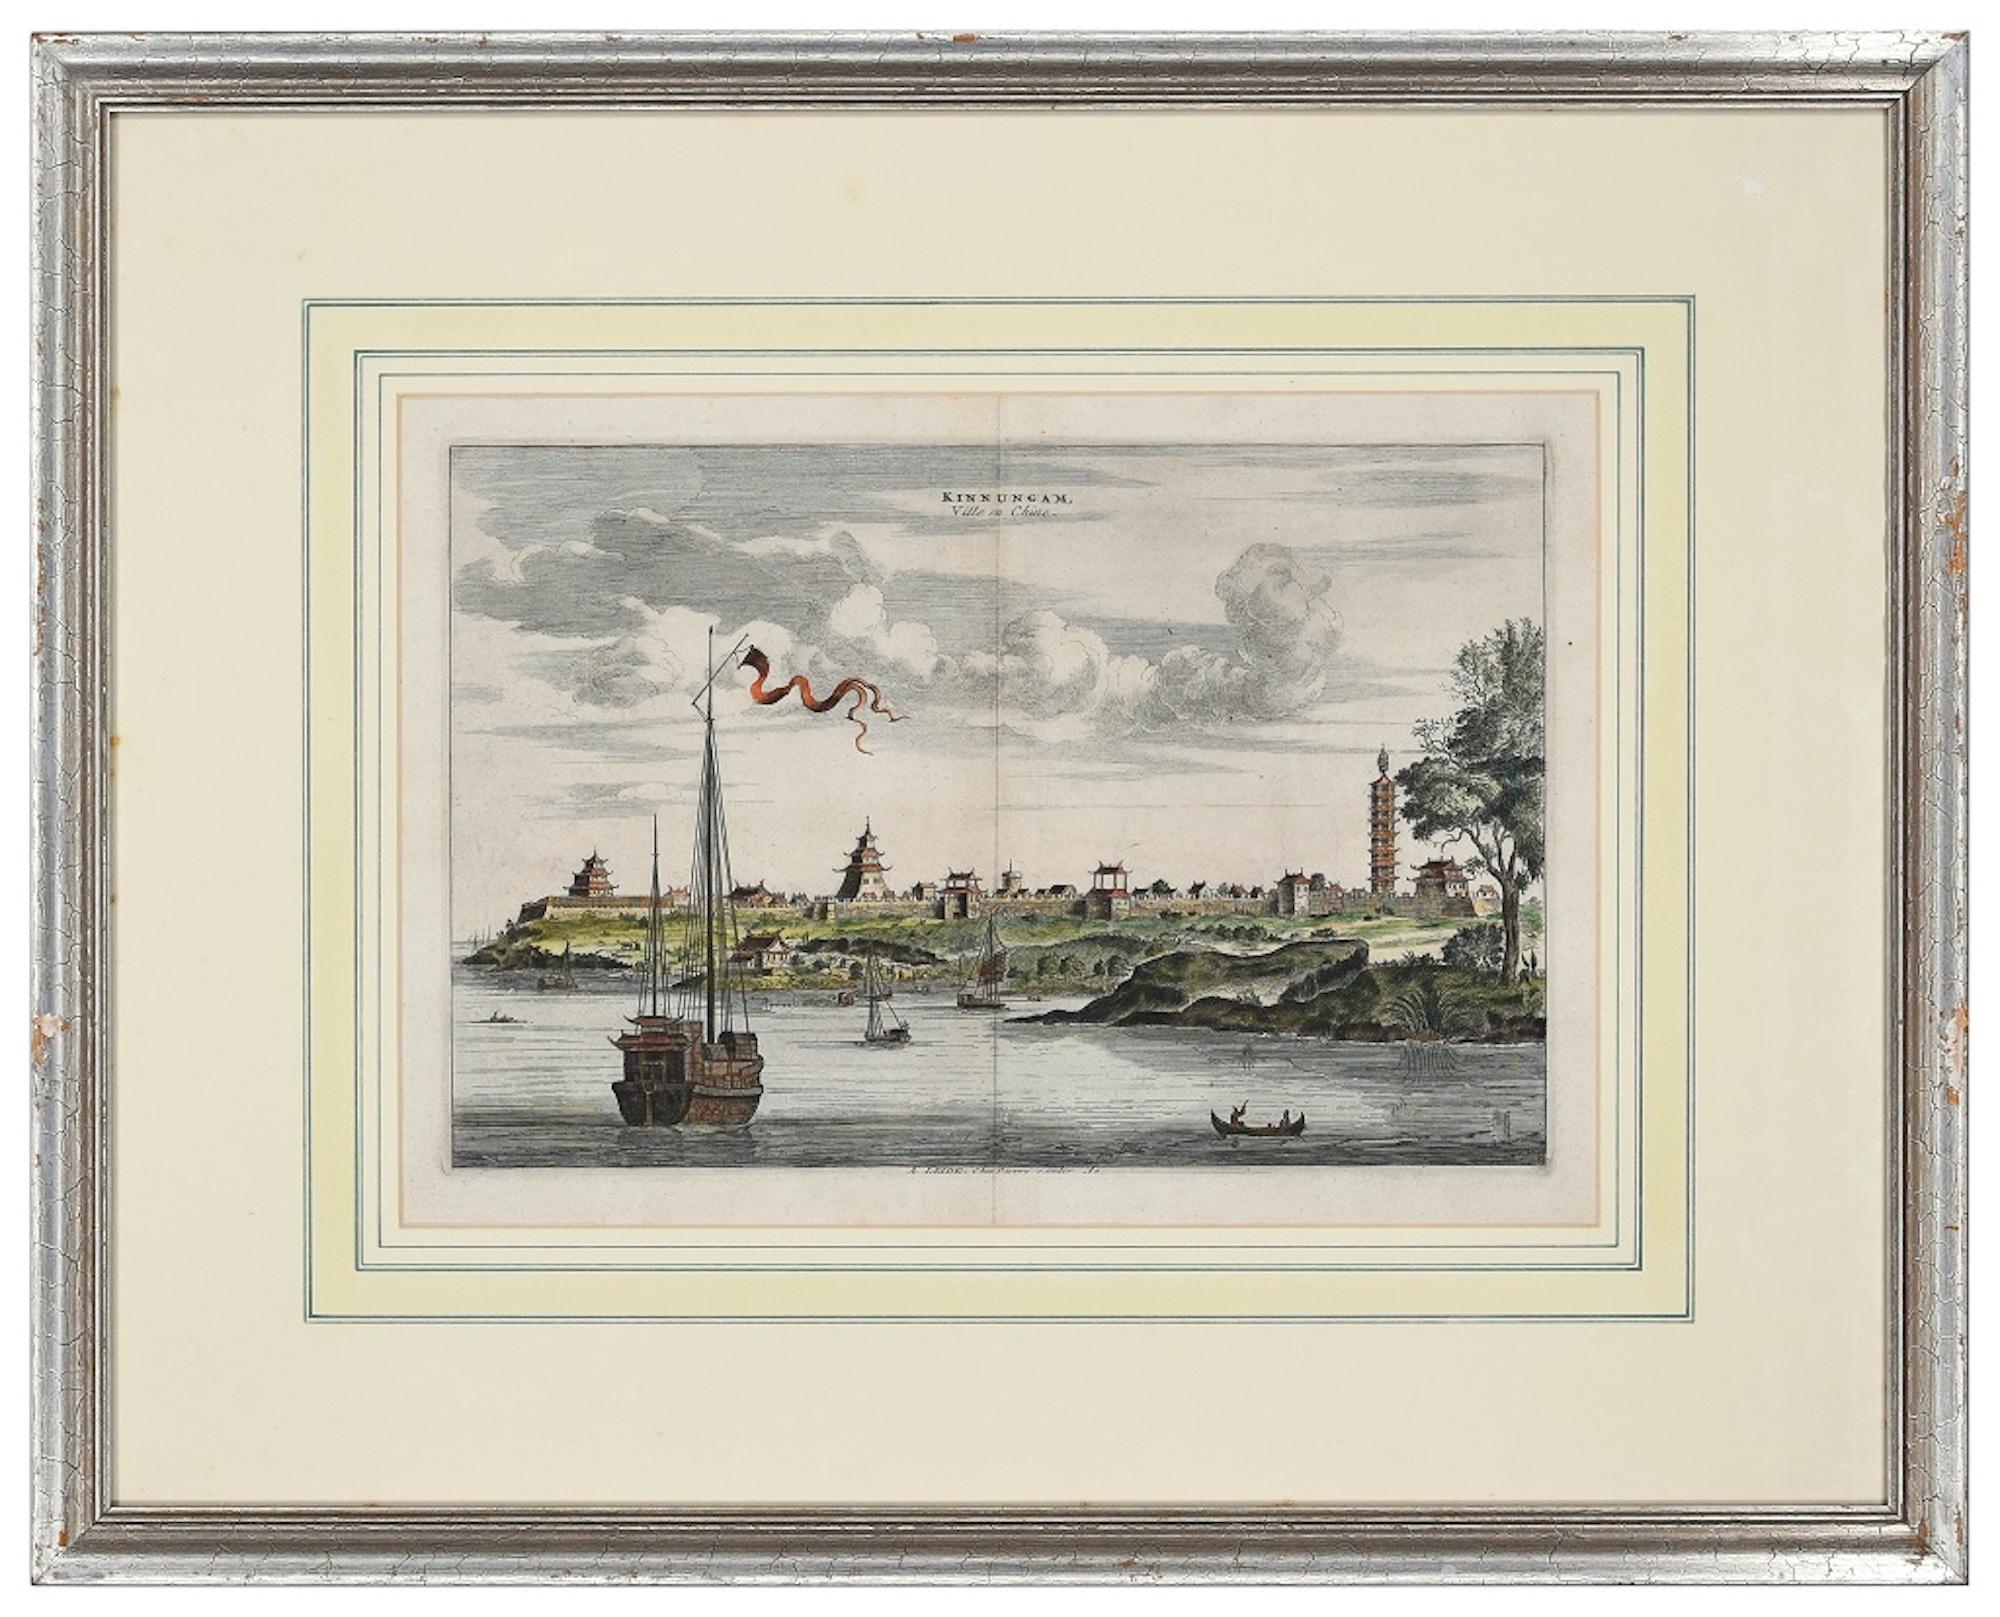 View Of Kinnungam - Hand Watercolored Etching by A. Leide - Print by Pieter Van Der Aa